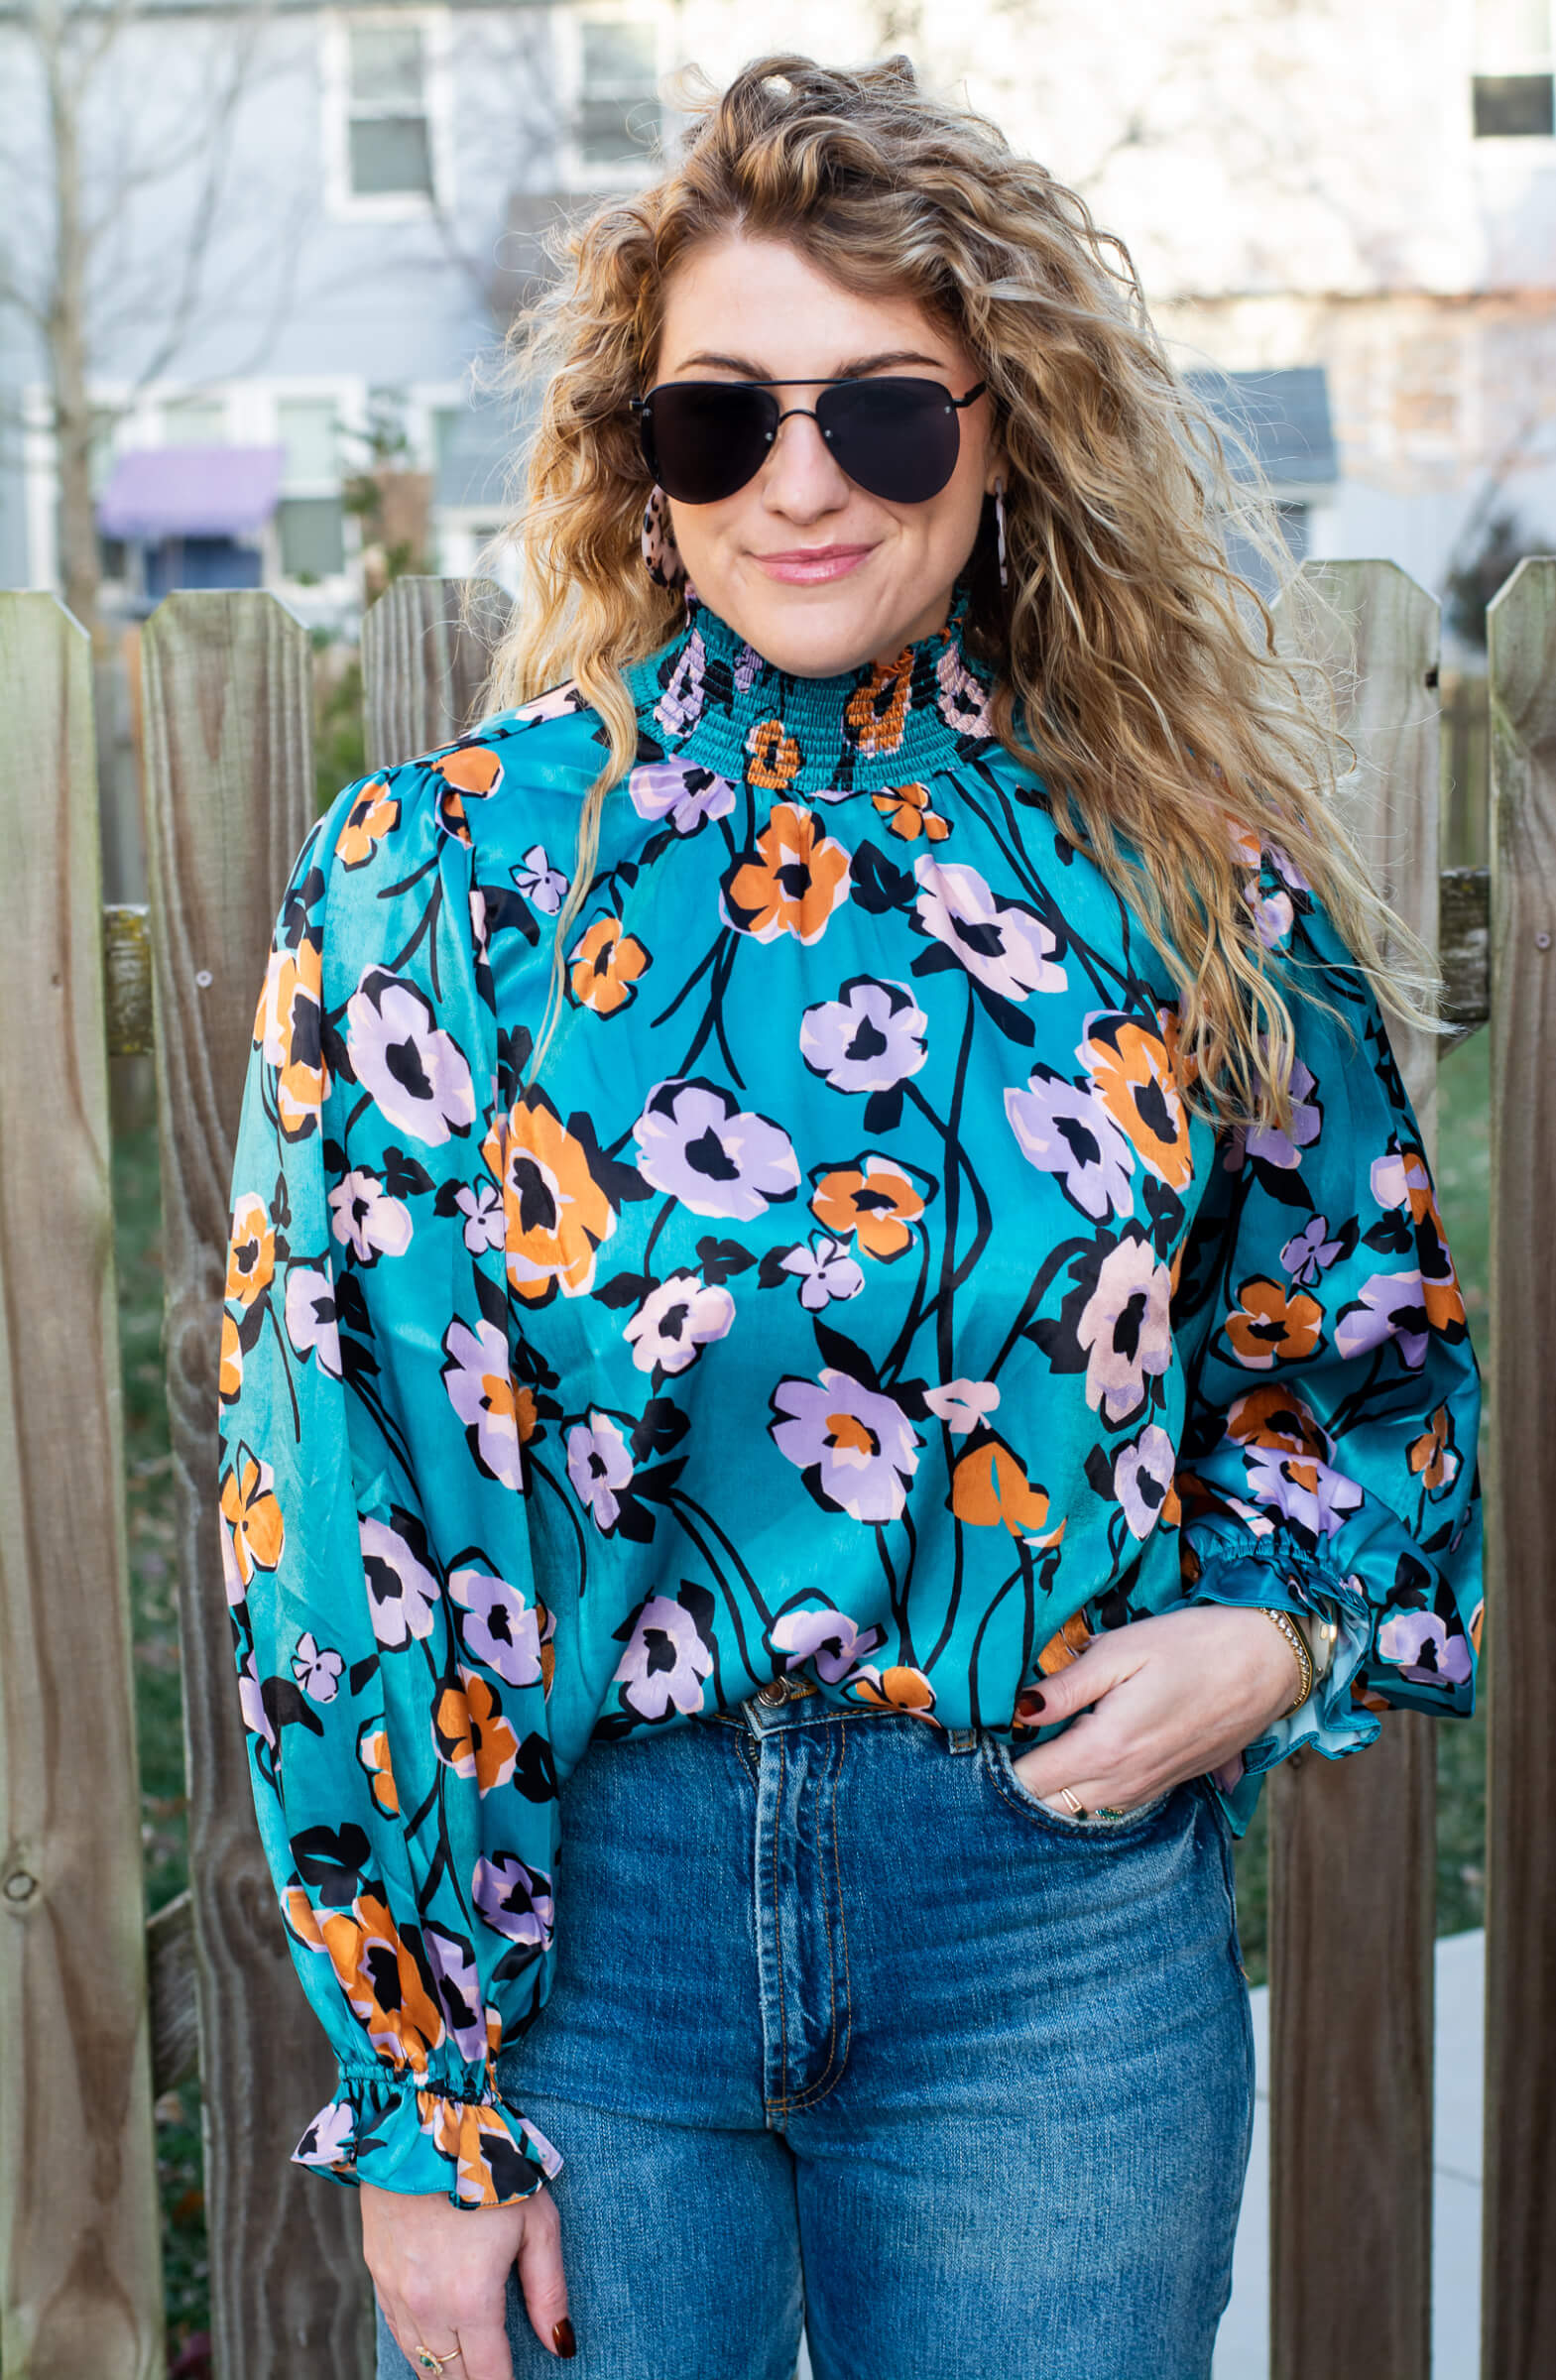 A Turquoise Floral Blouse for Winter and Spring. | LSR